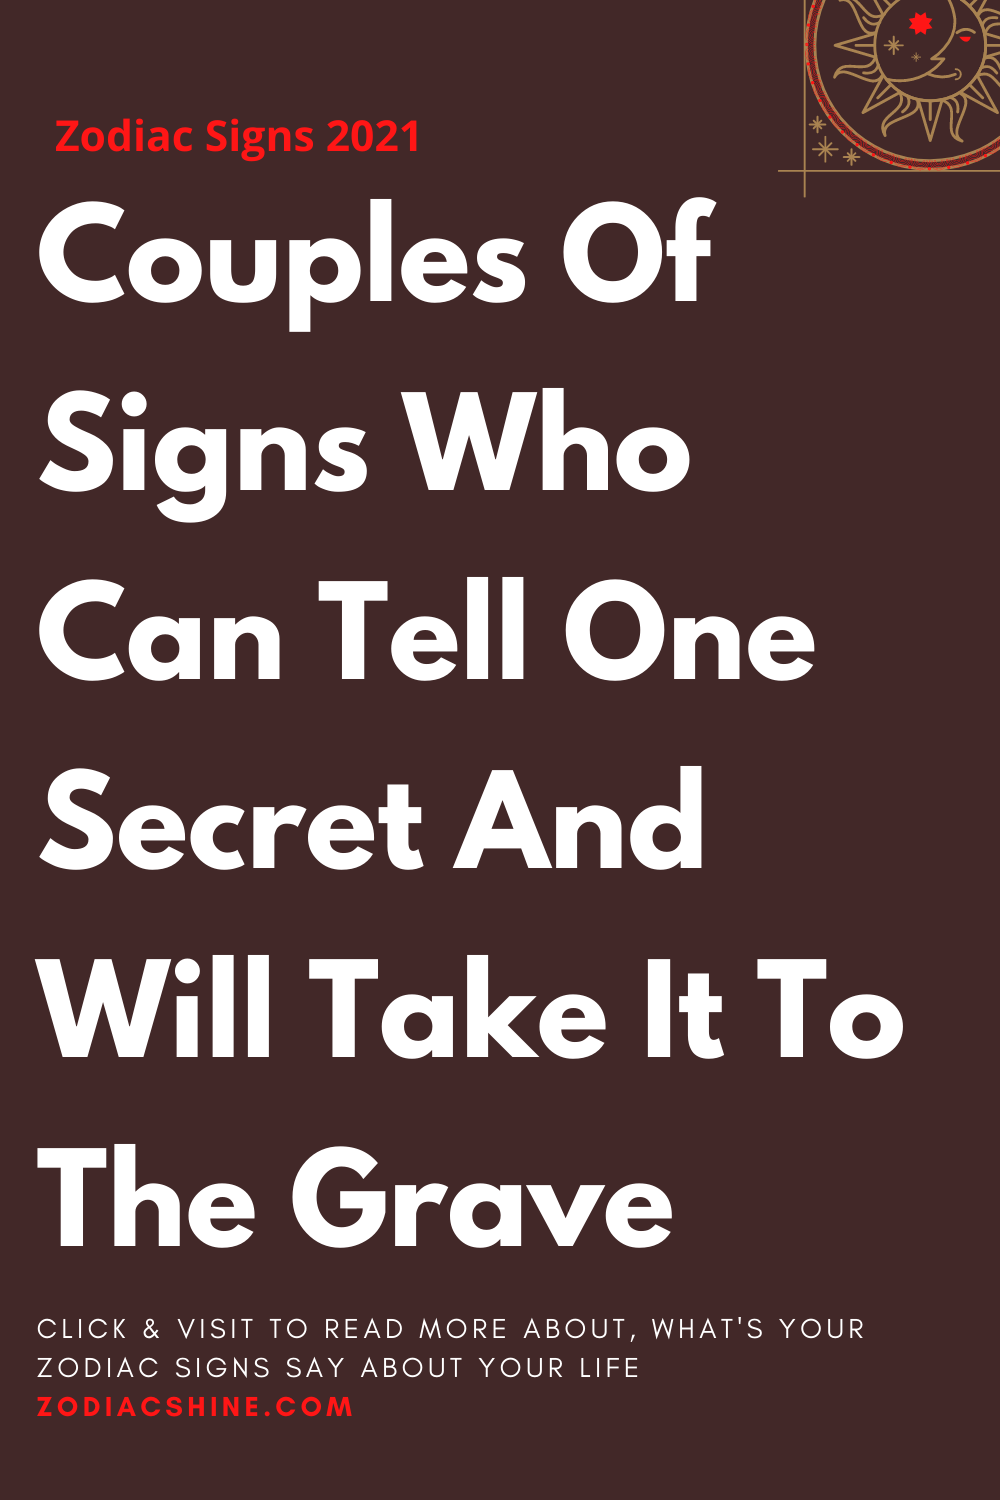 Couples Of Signs Who Can Tell One Secret And Will Take It To The Grave